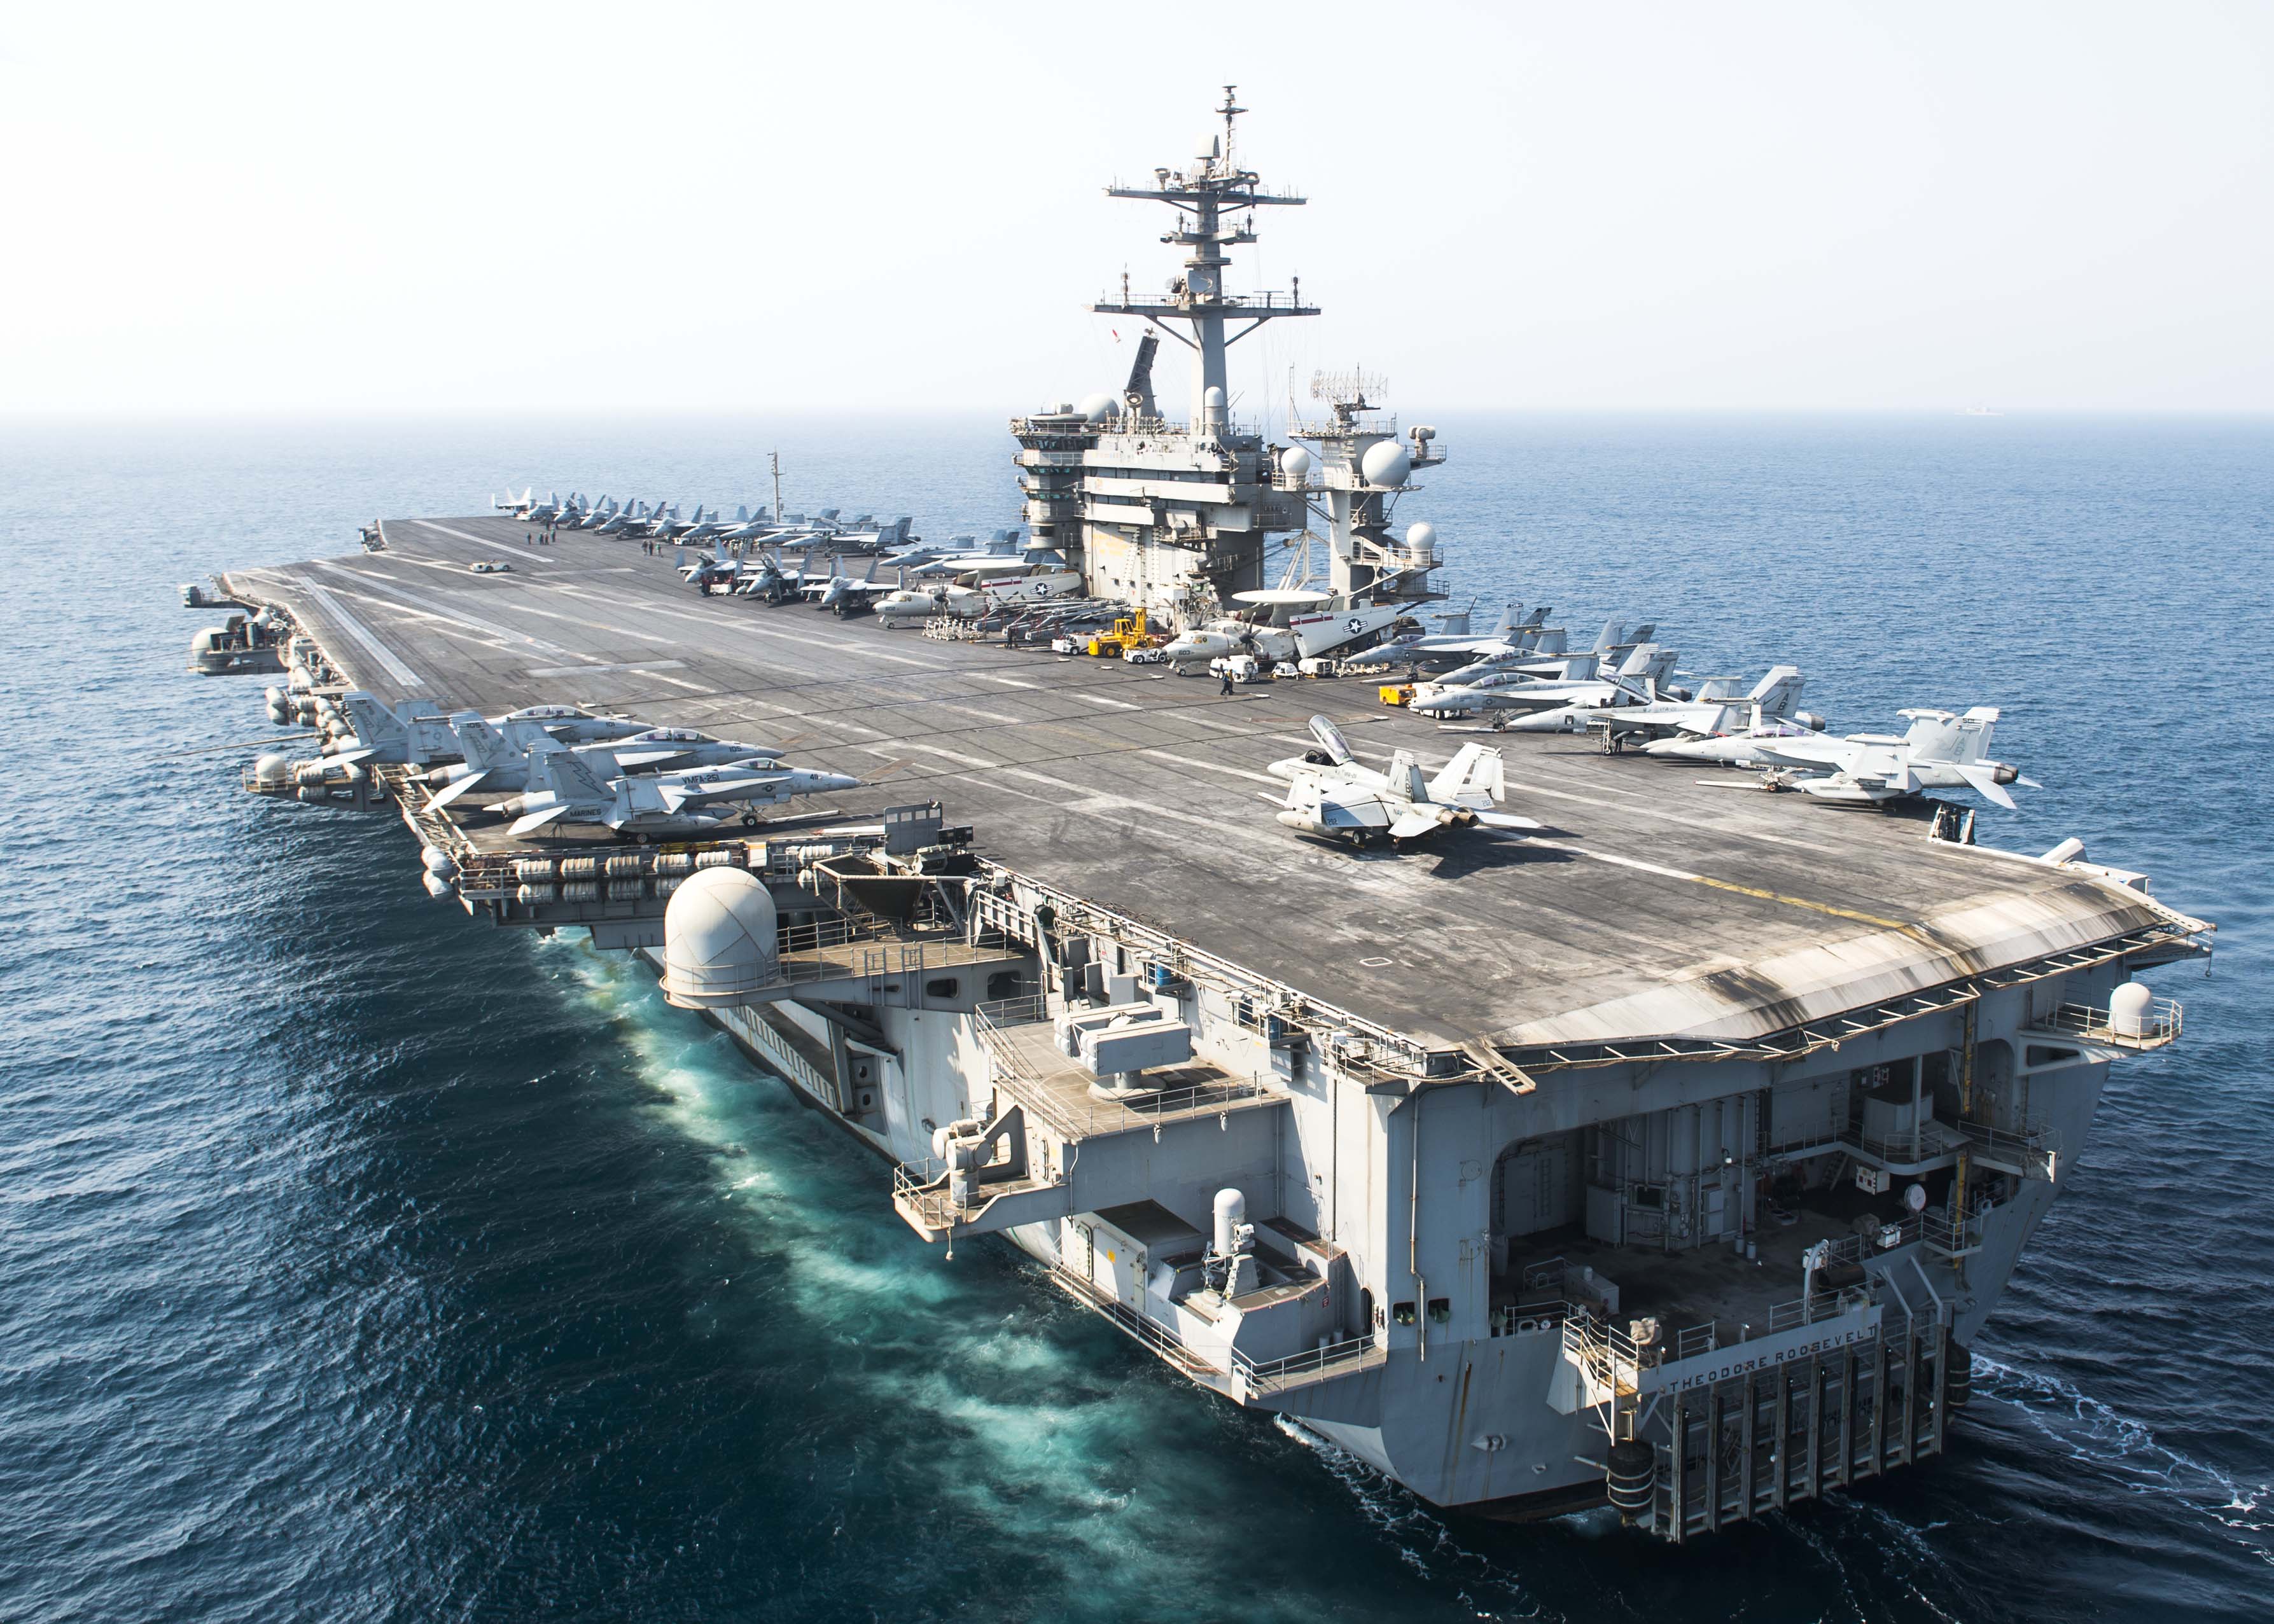 The aircraft carrier USS Theodore Roosevelt (CVN 71) transits the Arabian Gulf on Oct. 2, 2015. US Navy photo.